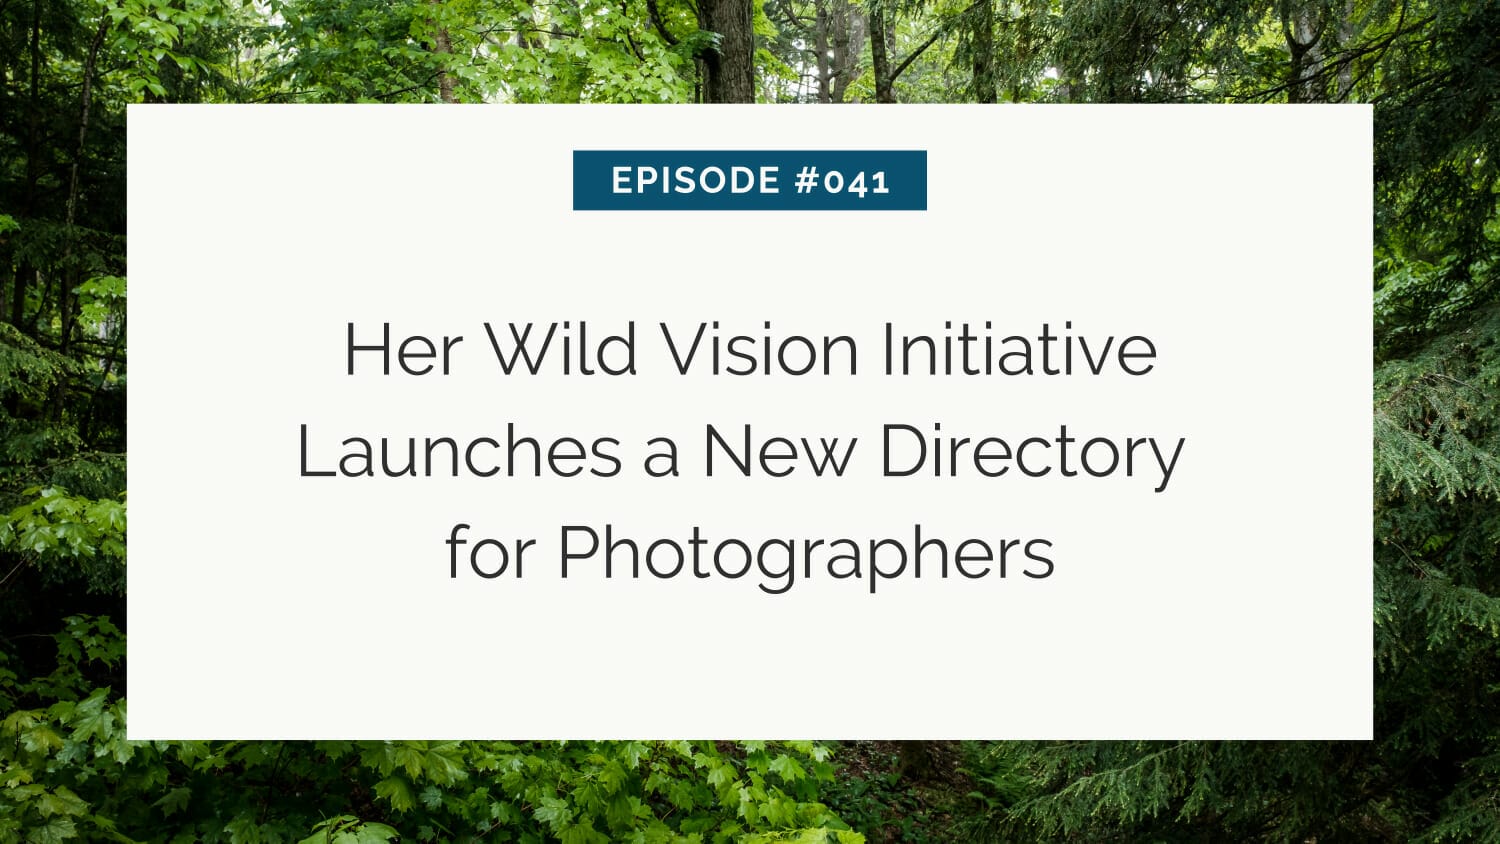 Episode #041: her wild vision initiative launches a new directory for photographers set against a backdrop of lush green foliage.